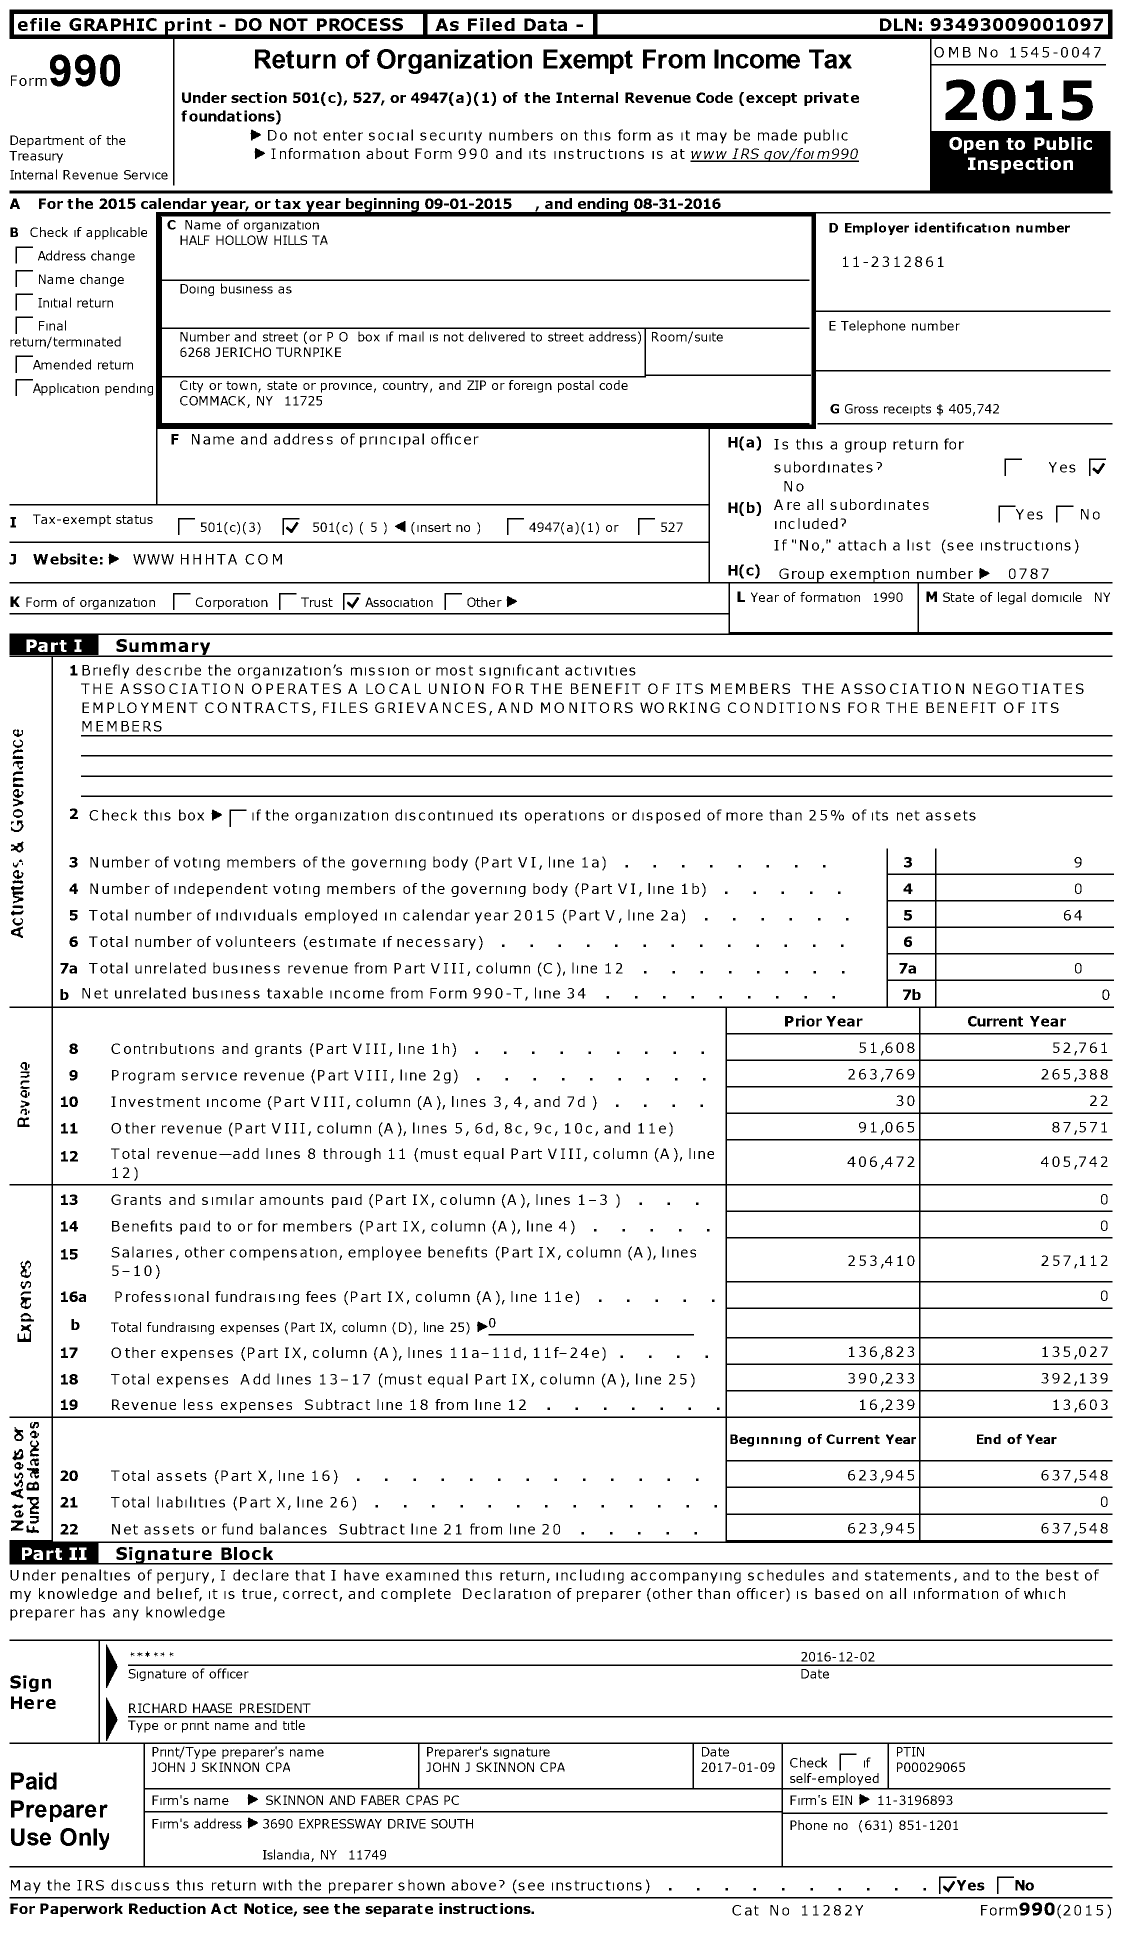 Image of first page of 2015 Form 990O for American Federation of Teachers - 2701 Half Hollow Hills TCHRS Assoc